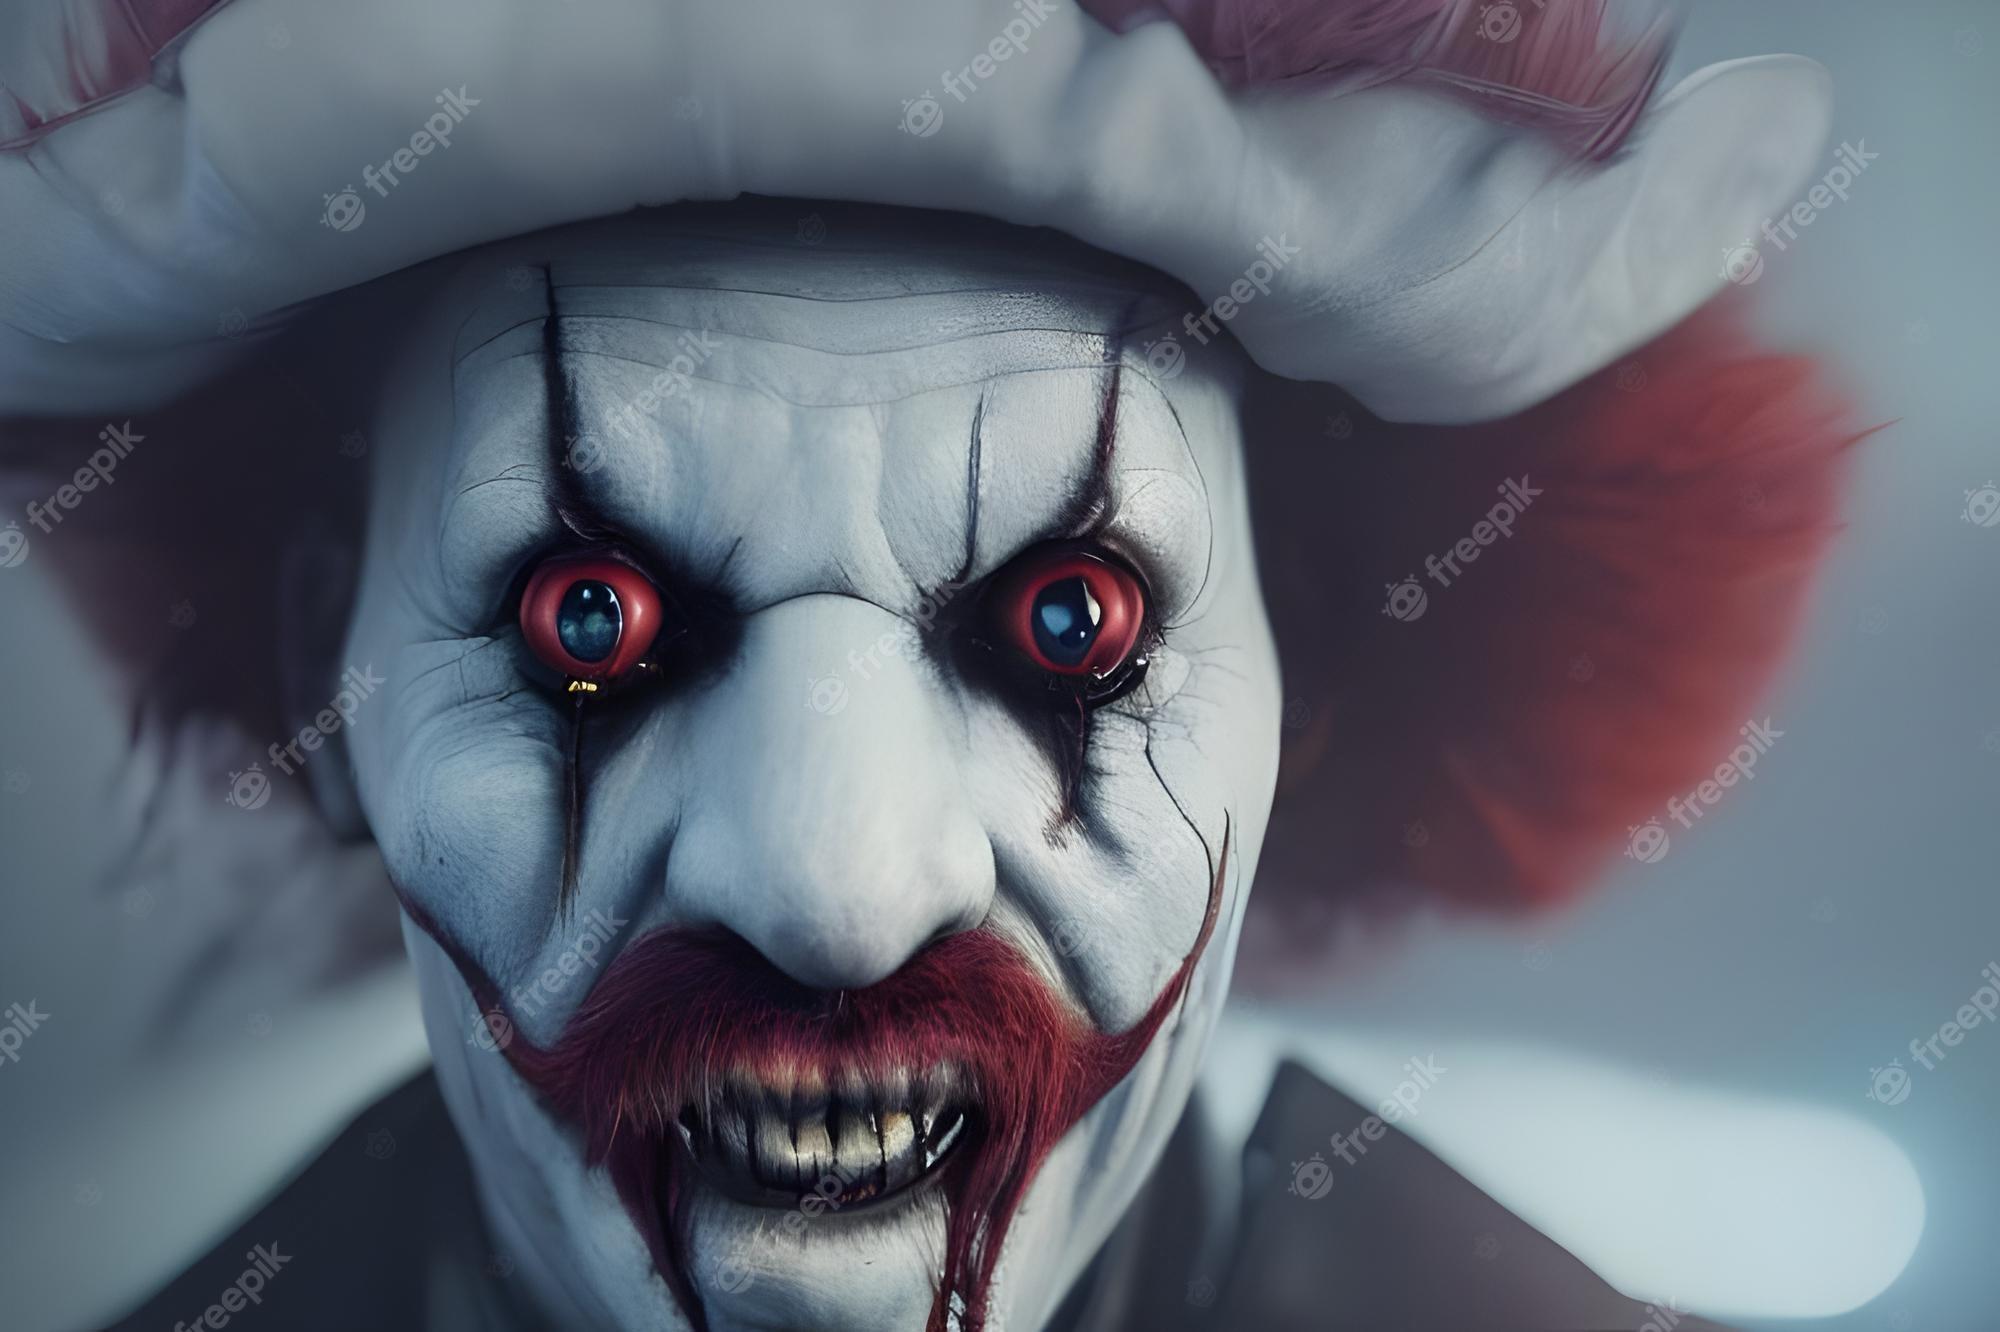 Premium Photo A Creepy Clown With Red Eyes And